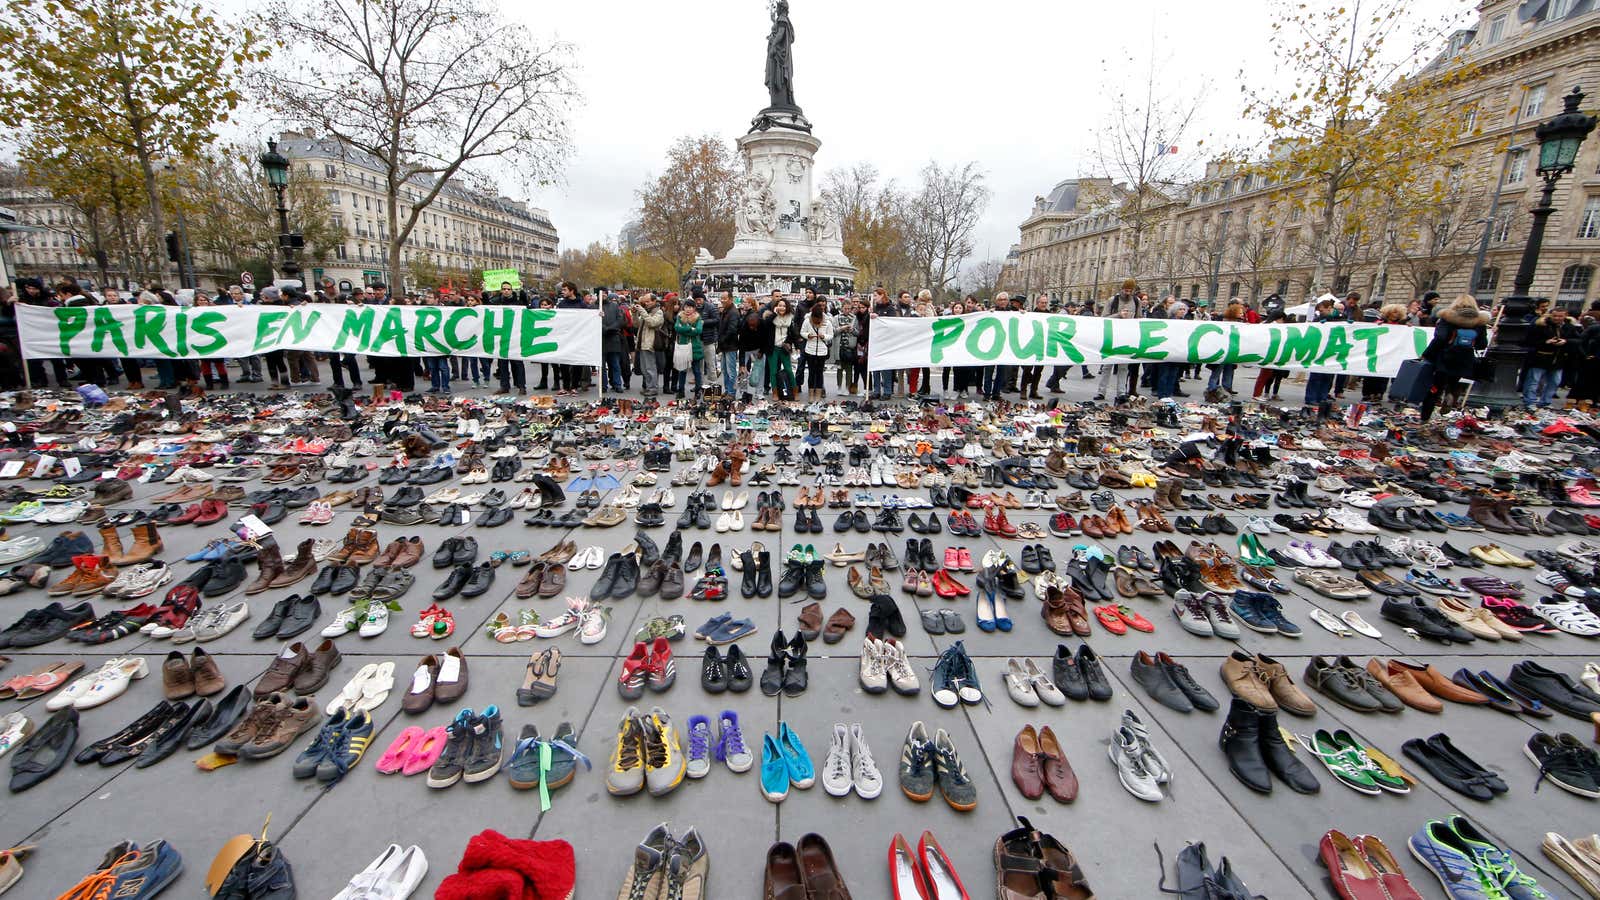 Shoes are symbolically placed on Place de la Republique in Paris after the cancellation of a planned climate march following shootings in the French capital